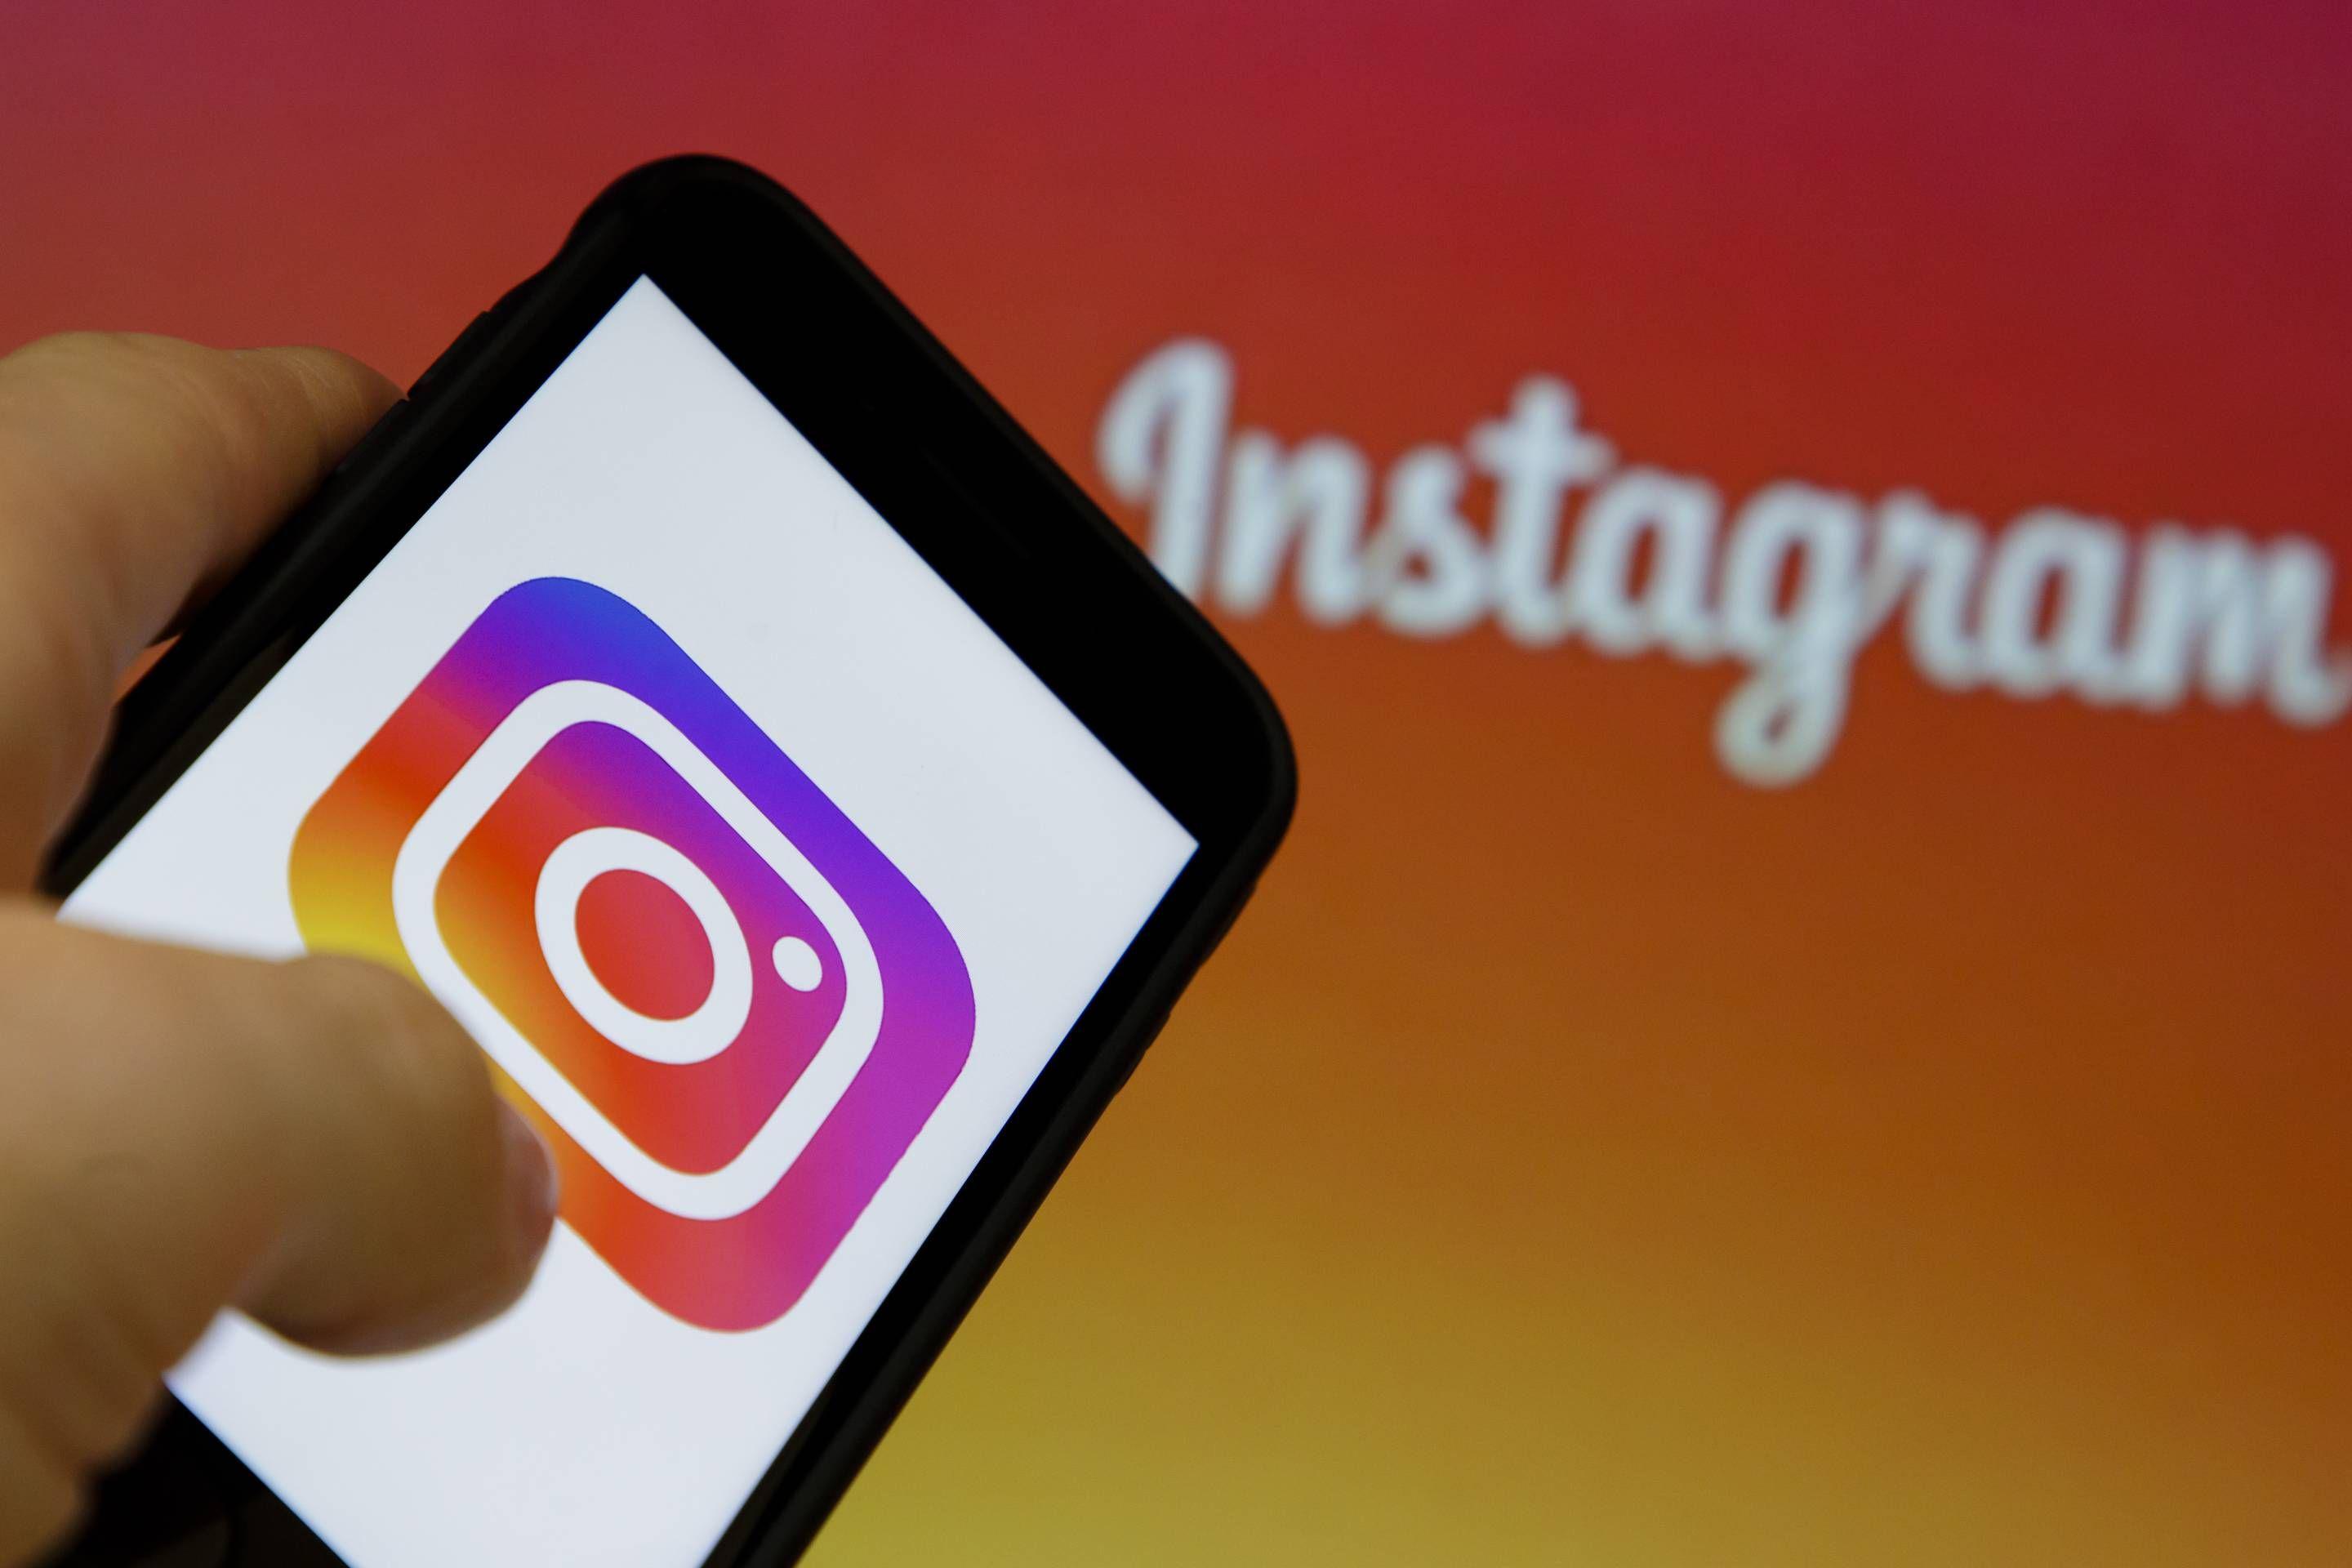 Cyberbullying Logo - Instagram Says It Can Now Detect Cyberbullying in Videos | Fortune